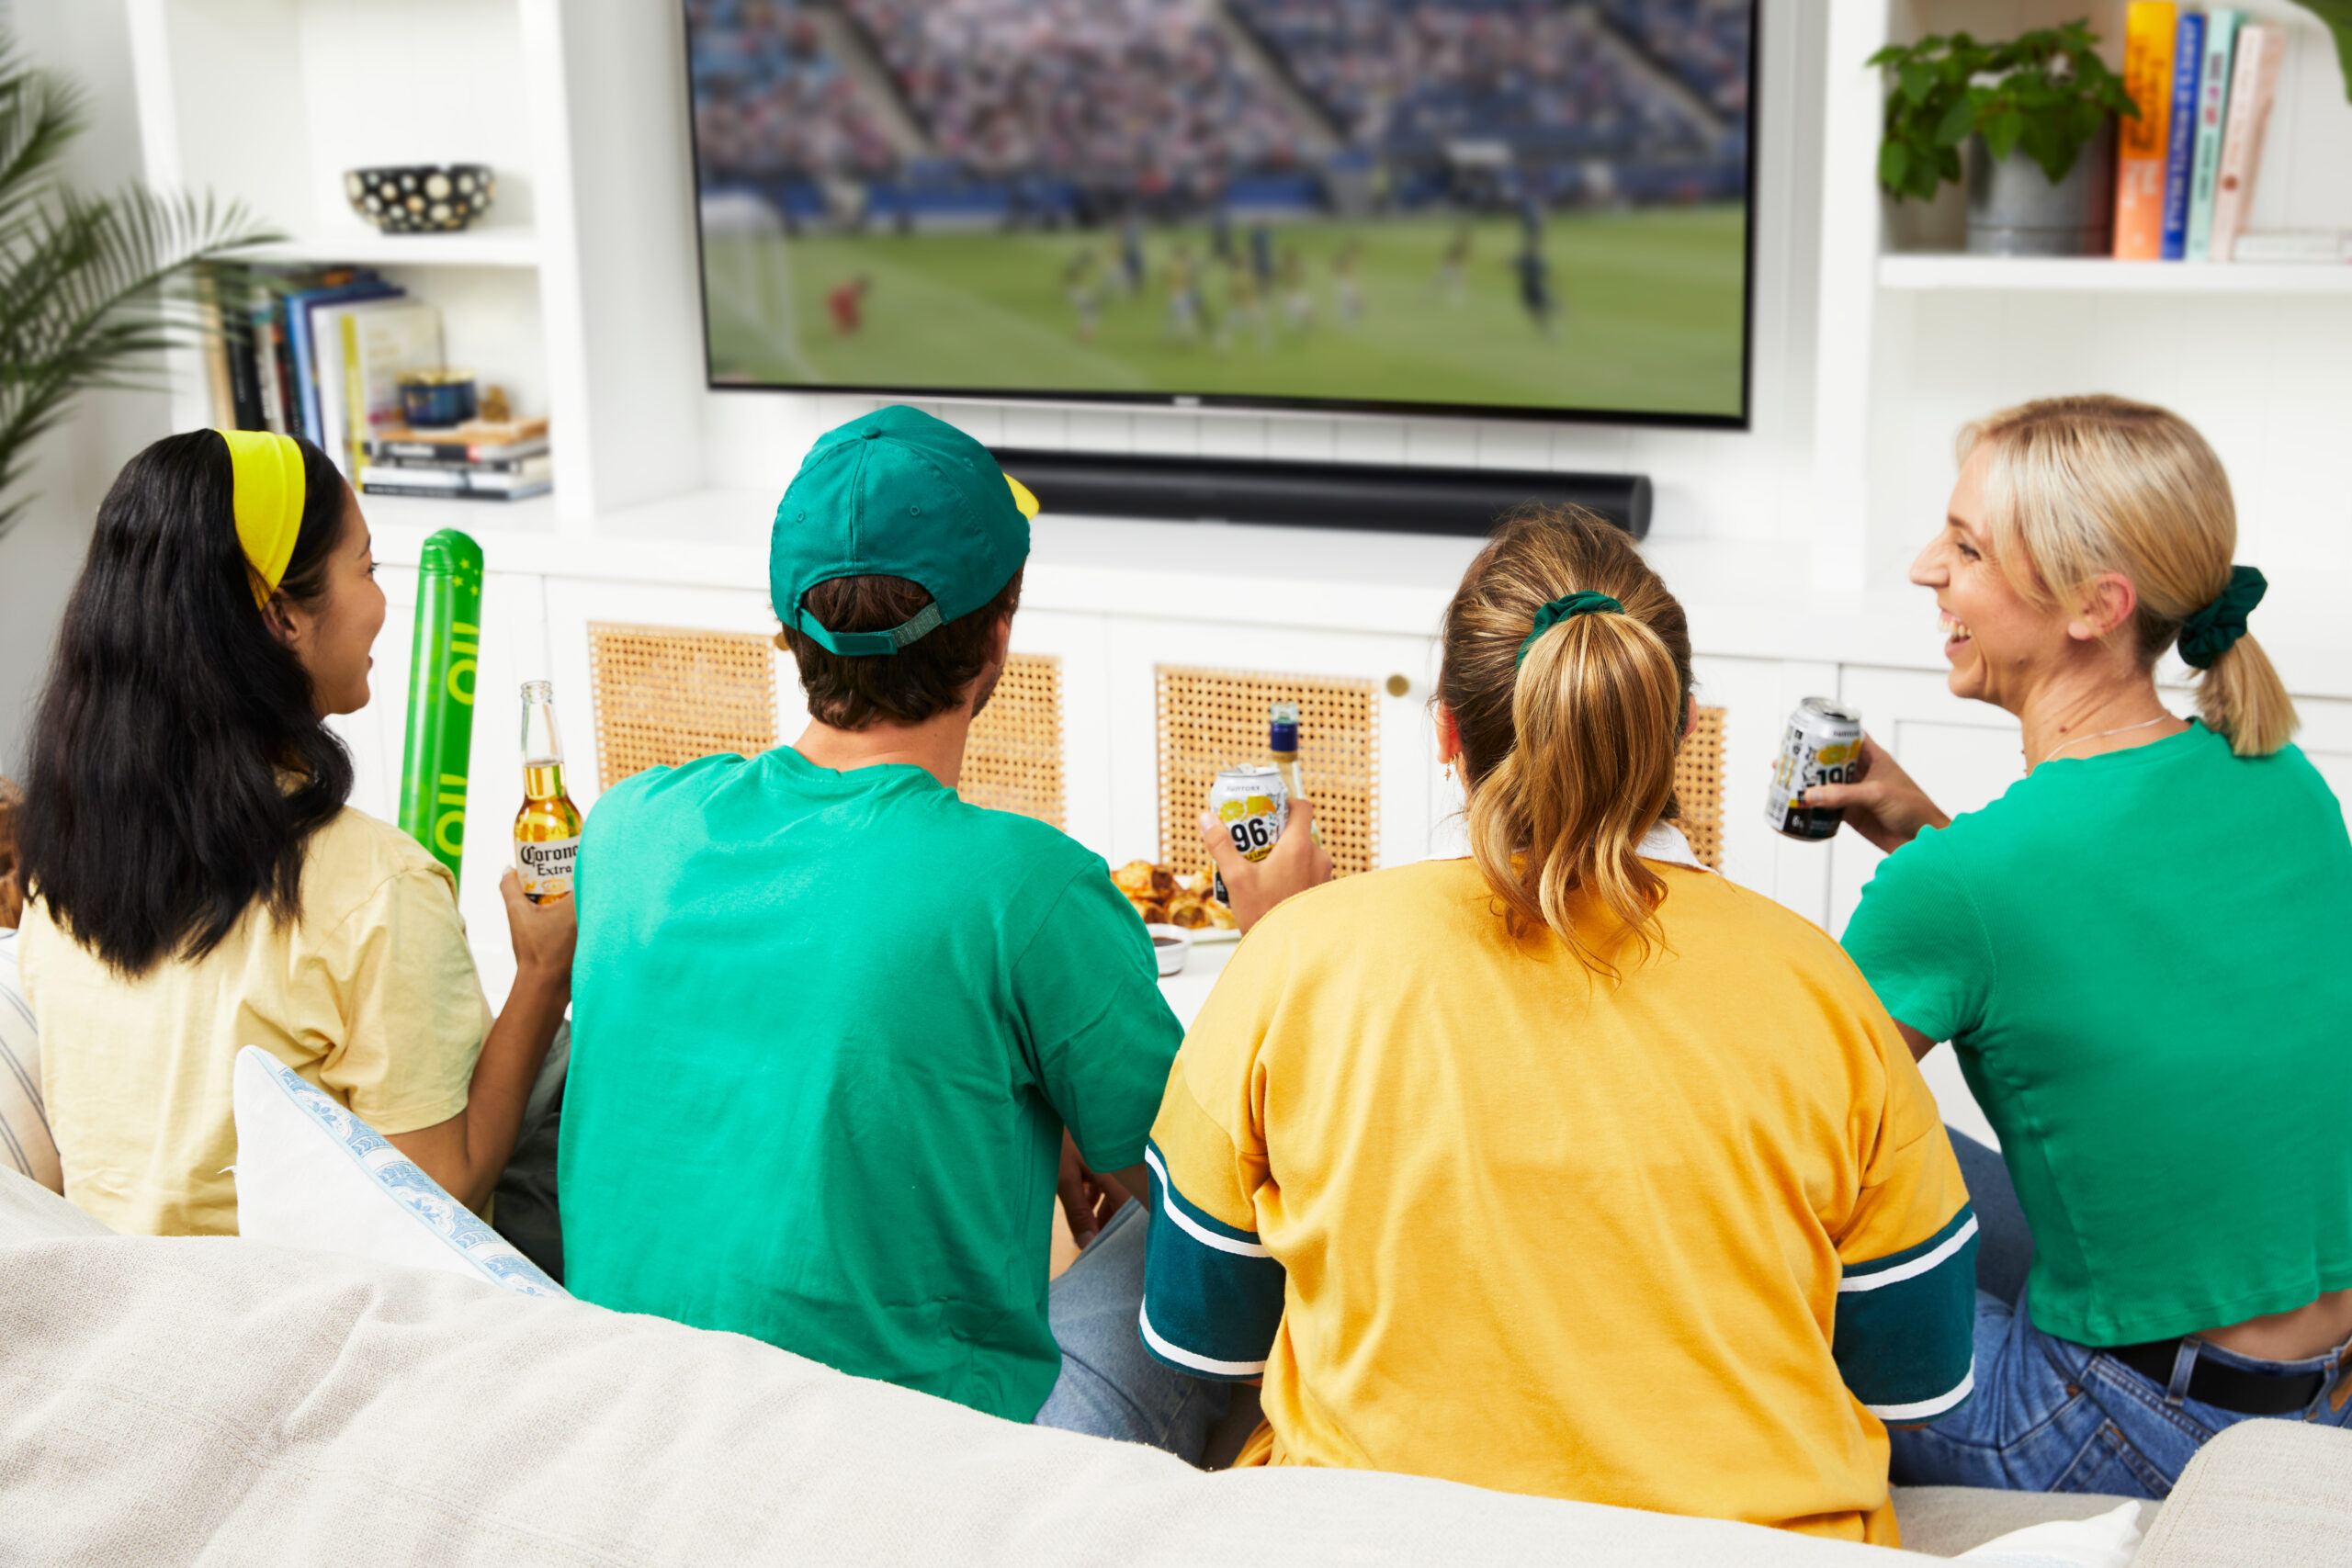 Group of people watching sports on TV